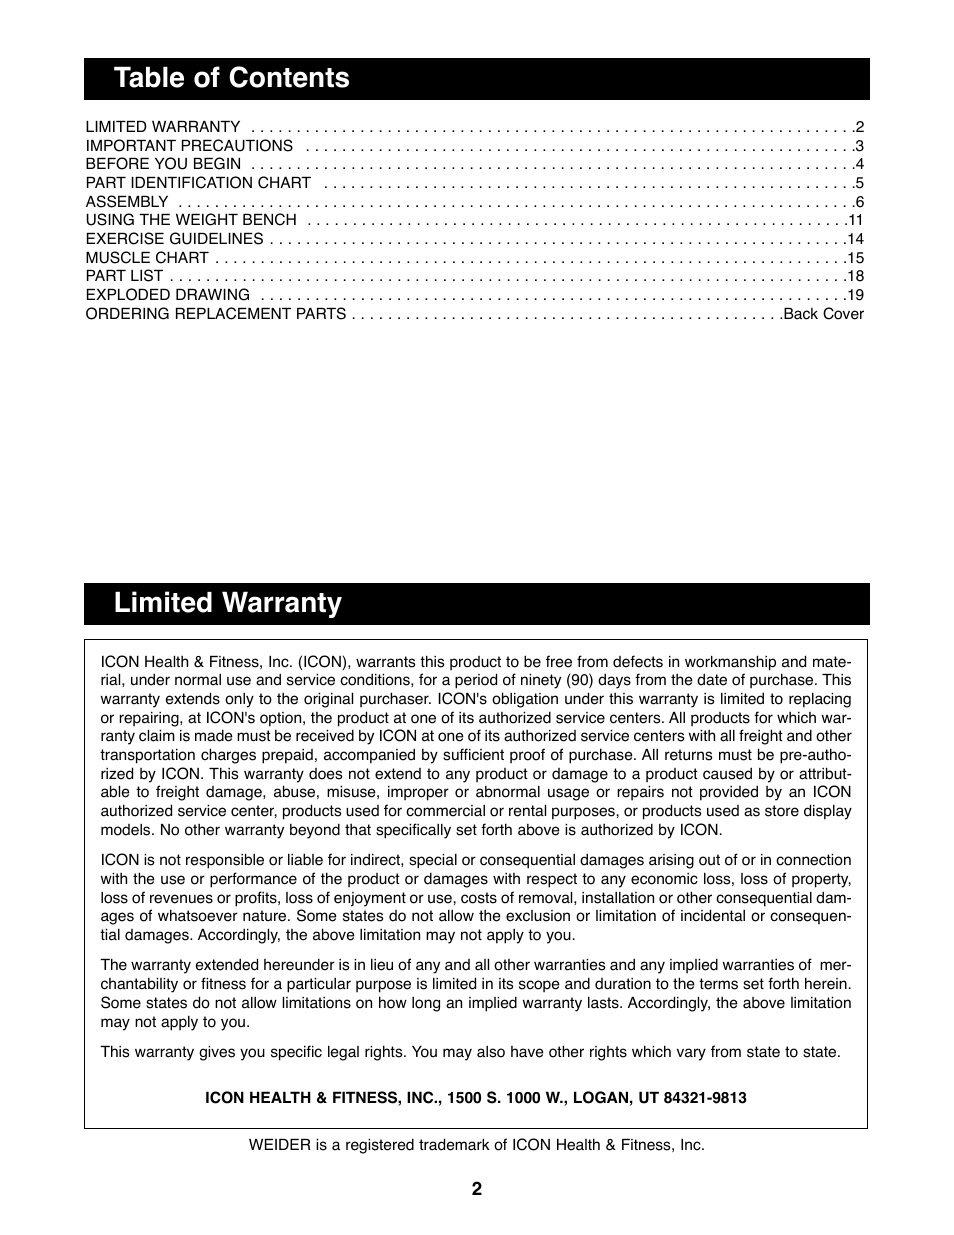 Table of contents limited warranty | Weider 148 User Manual | Page 2 / 20